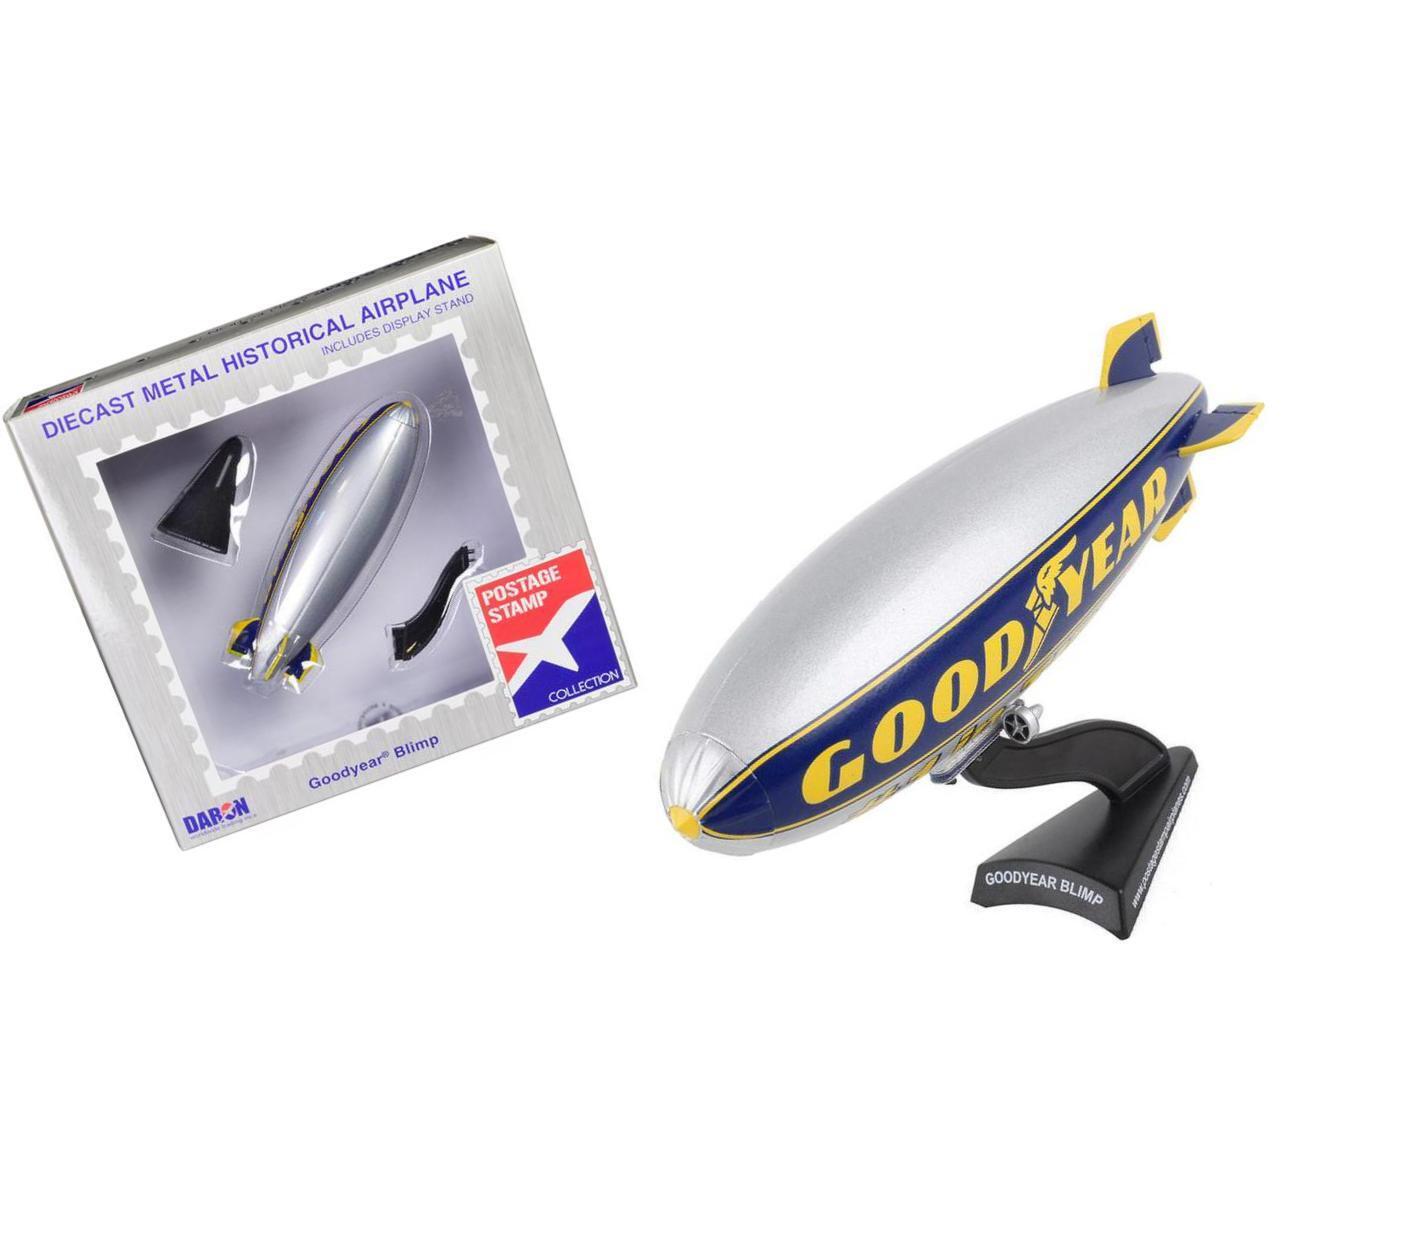 Goodyear Blimp Silver Metallic With Blue And Yellow Graphics #1 In Tires 1/350